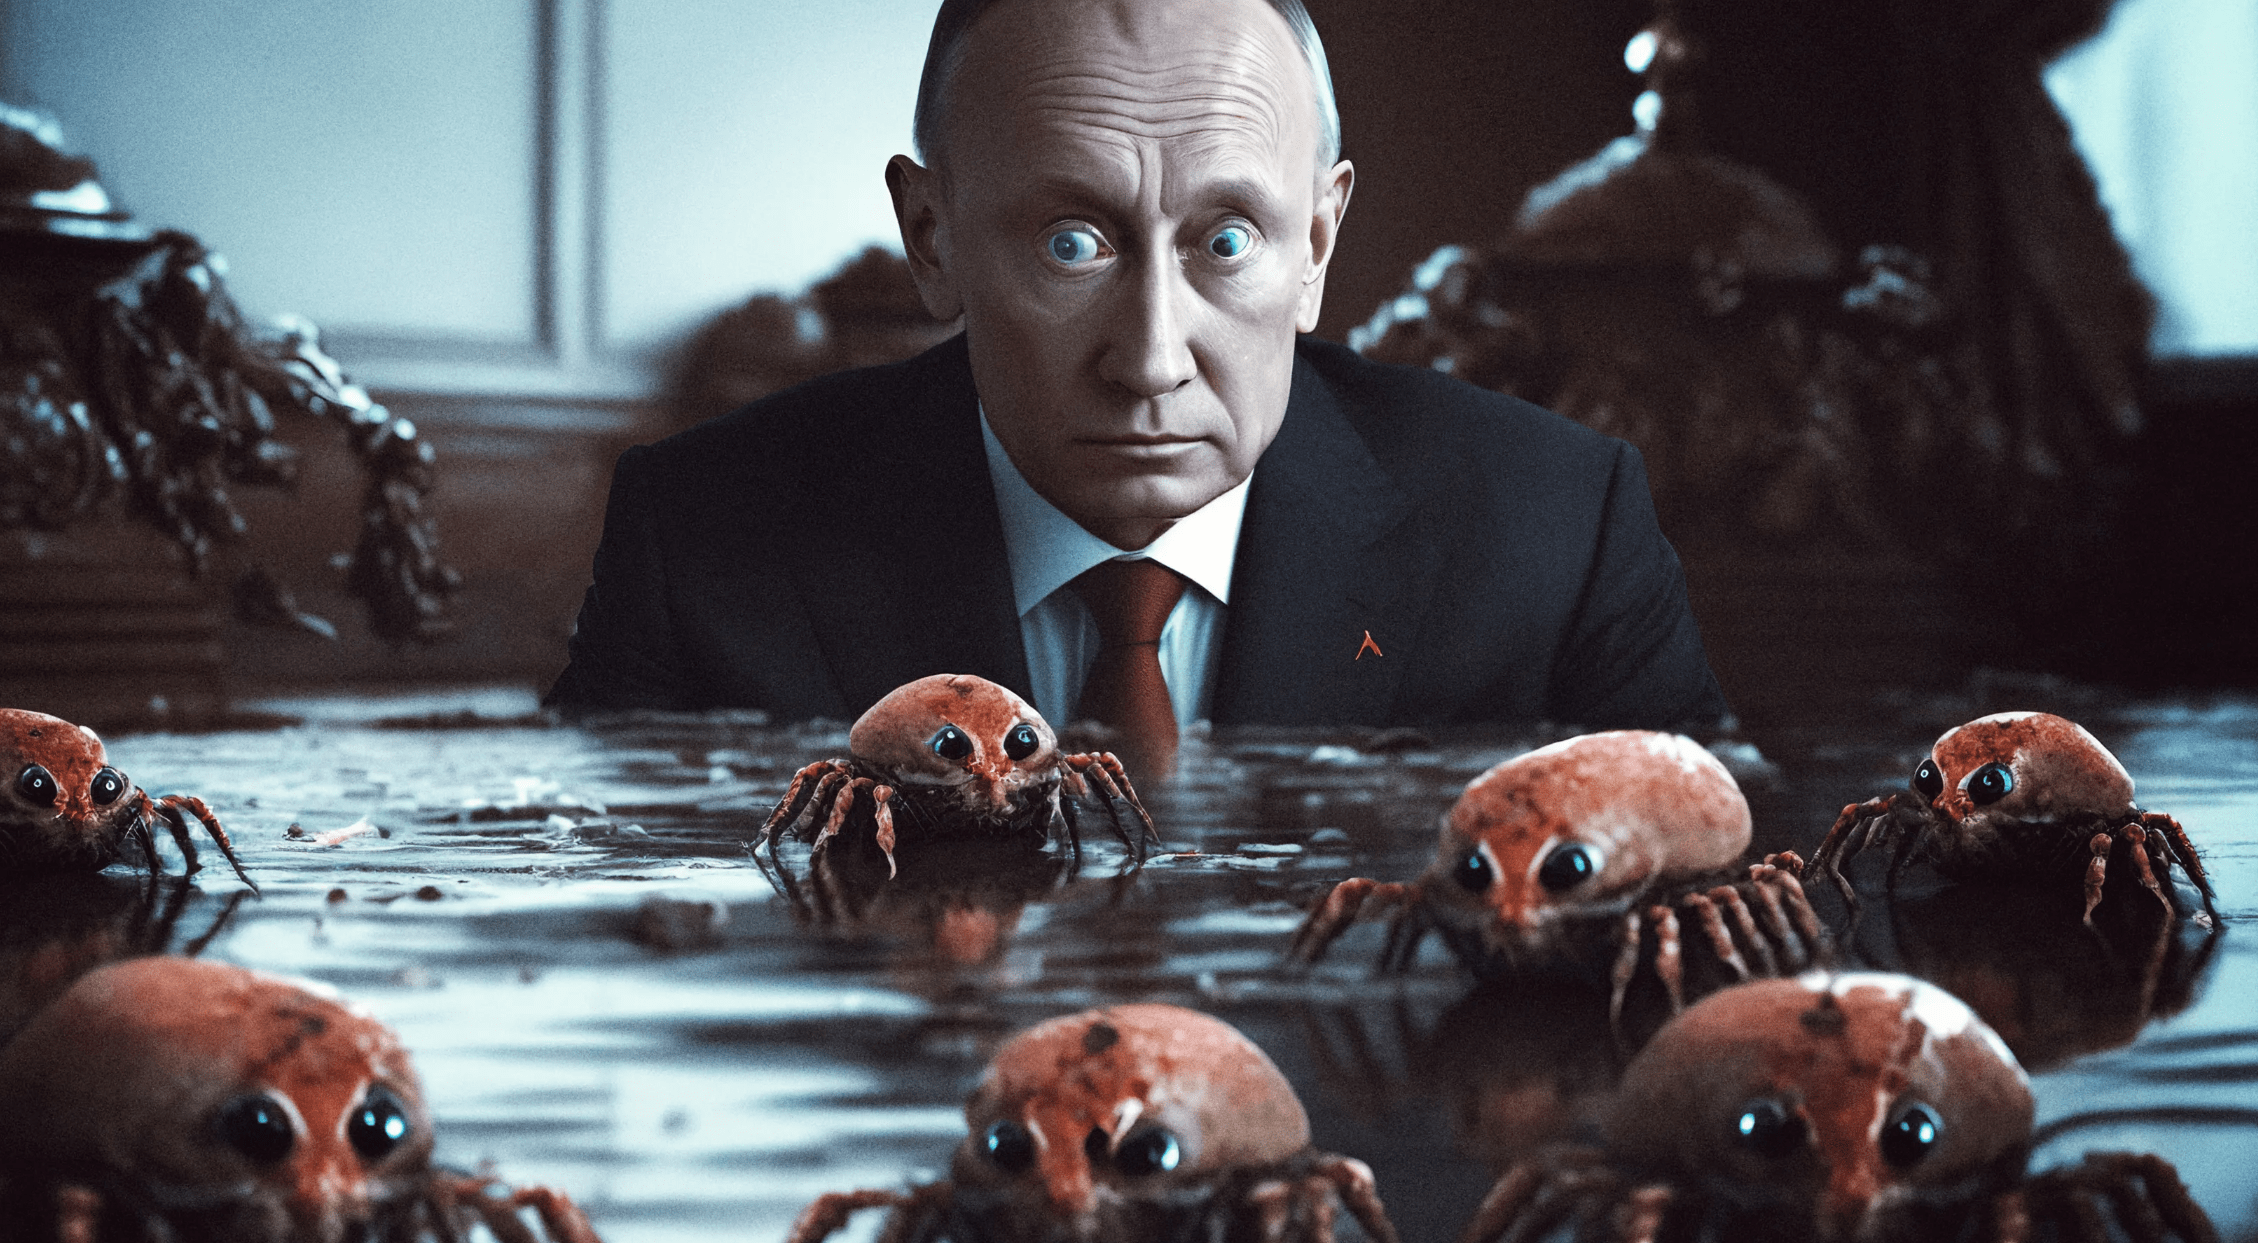 Investigative Stories from Ukraine: Russia's state censor to track Putin memes with help of AI